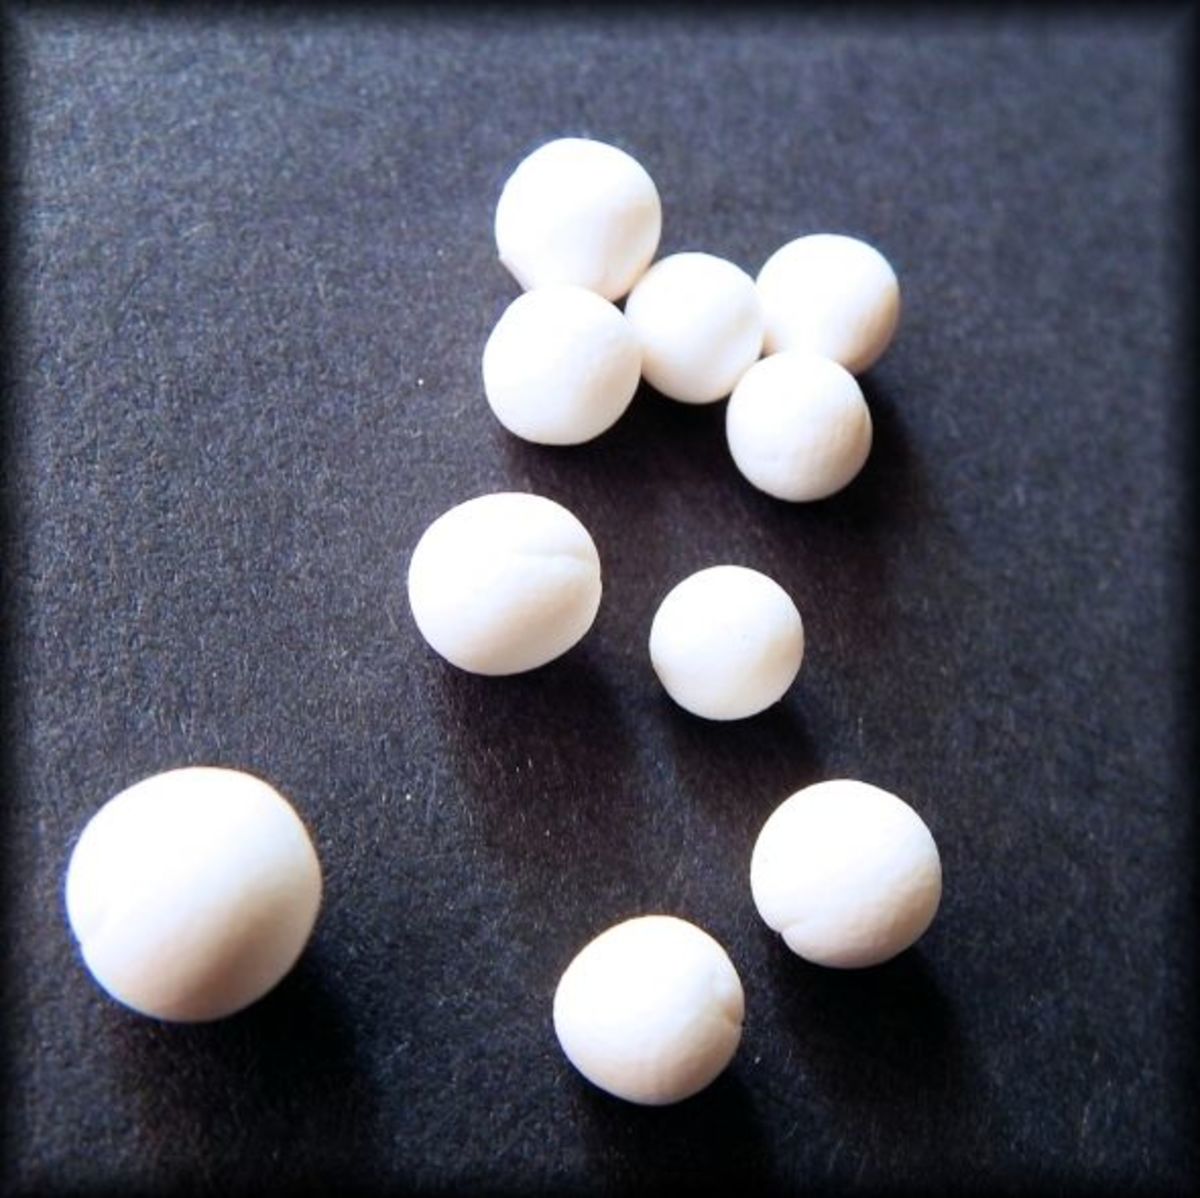 Tiny spheres of polymer clay